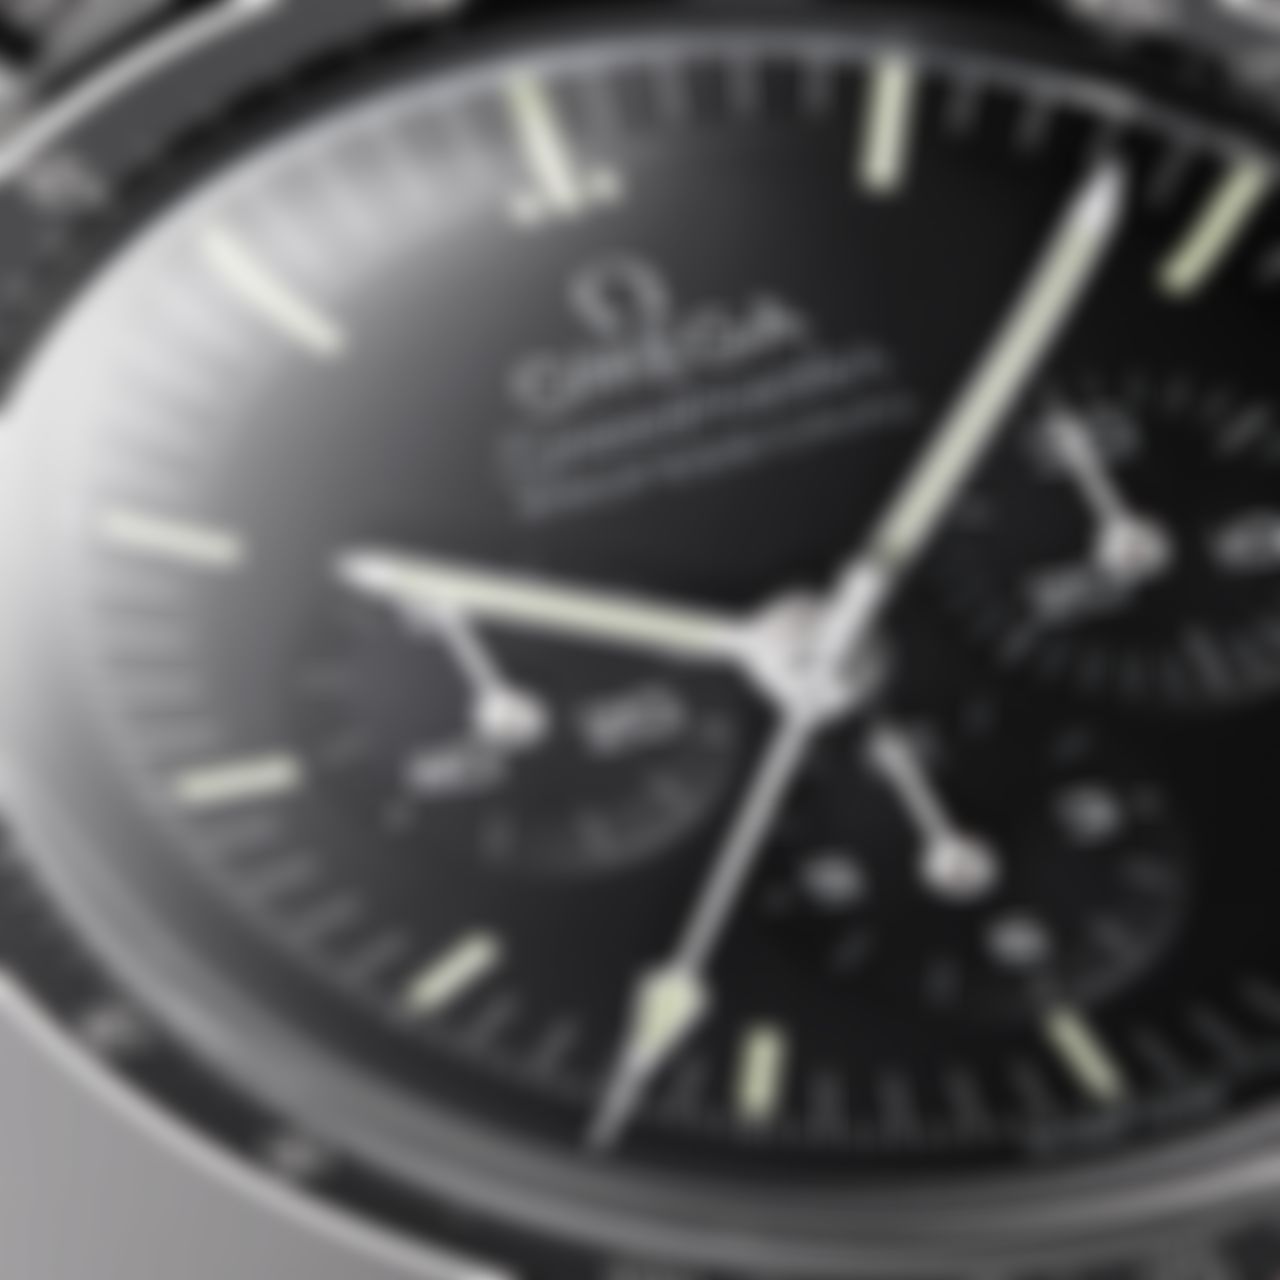 FROM THE MOON TO GALERÍA CANALEJAS. CELEBRATE THE ANNIVERSARY OF THE OMEGA SPEEDMASTER MOONWATCH